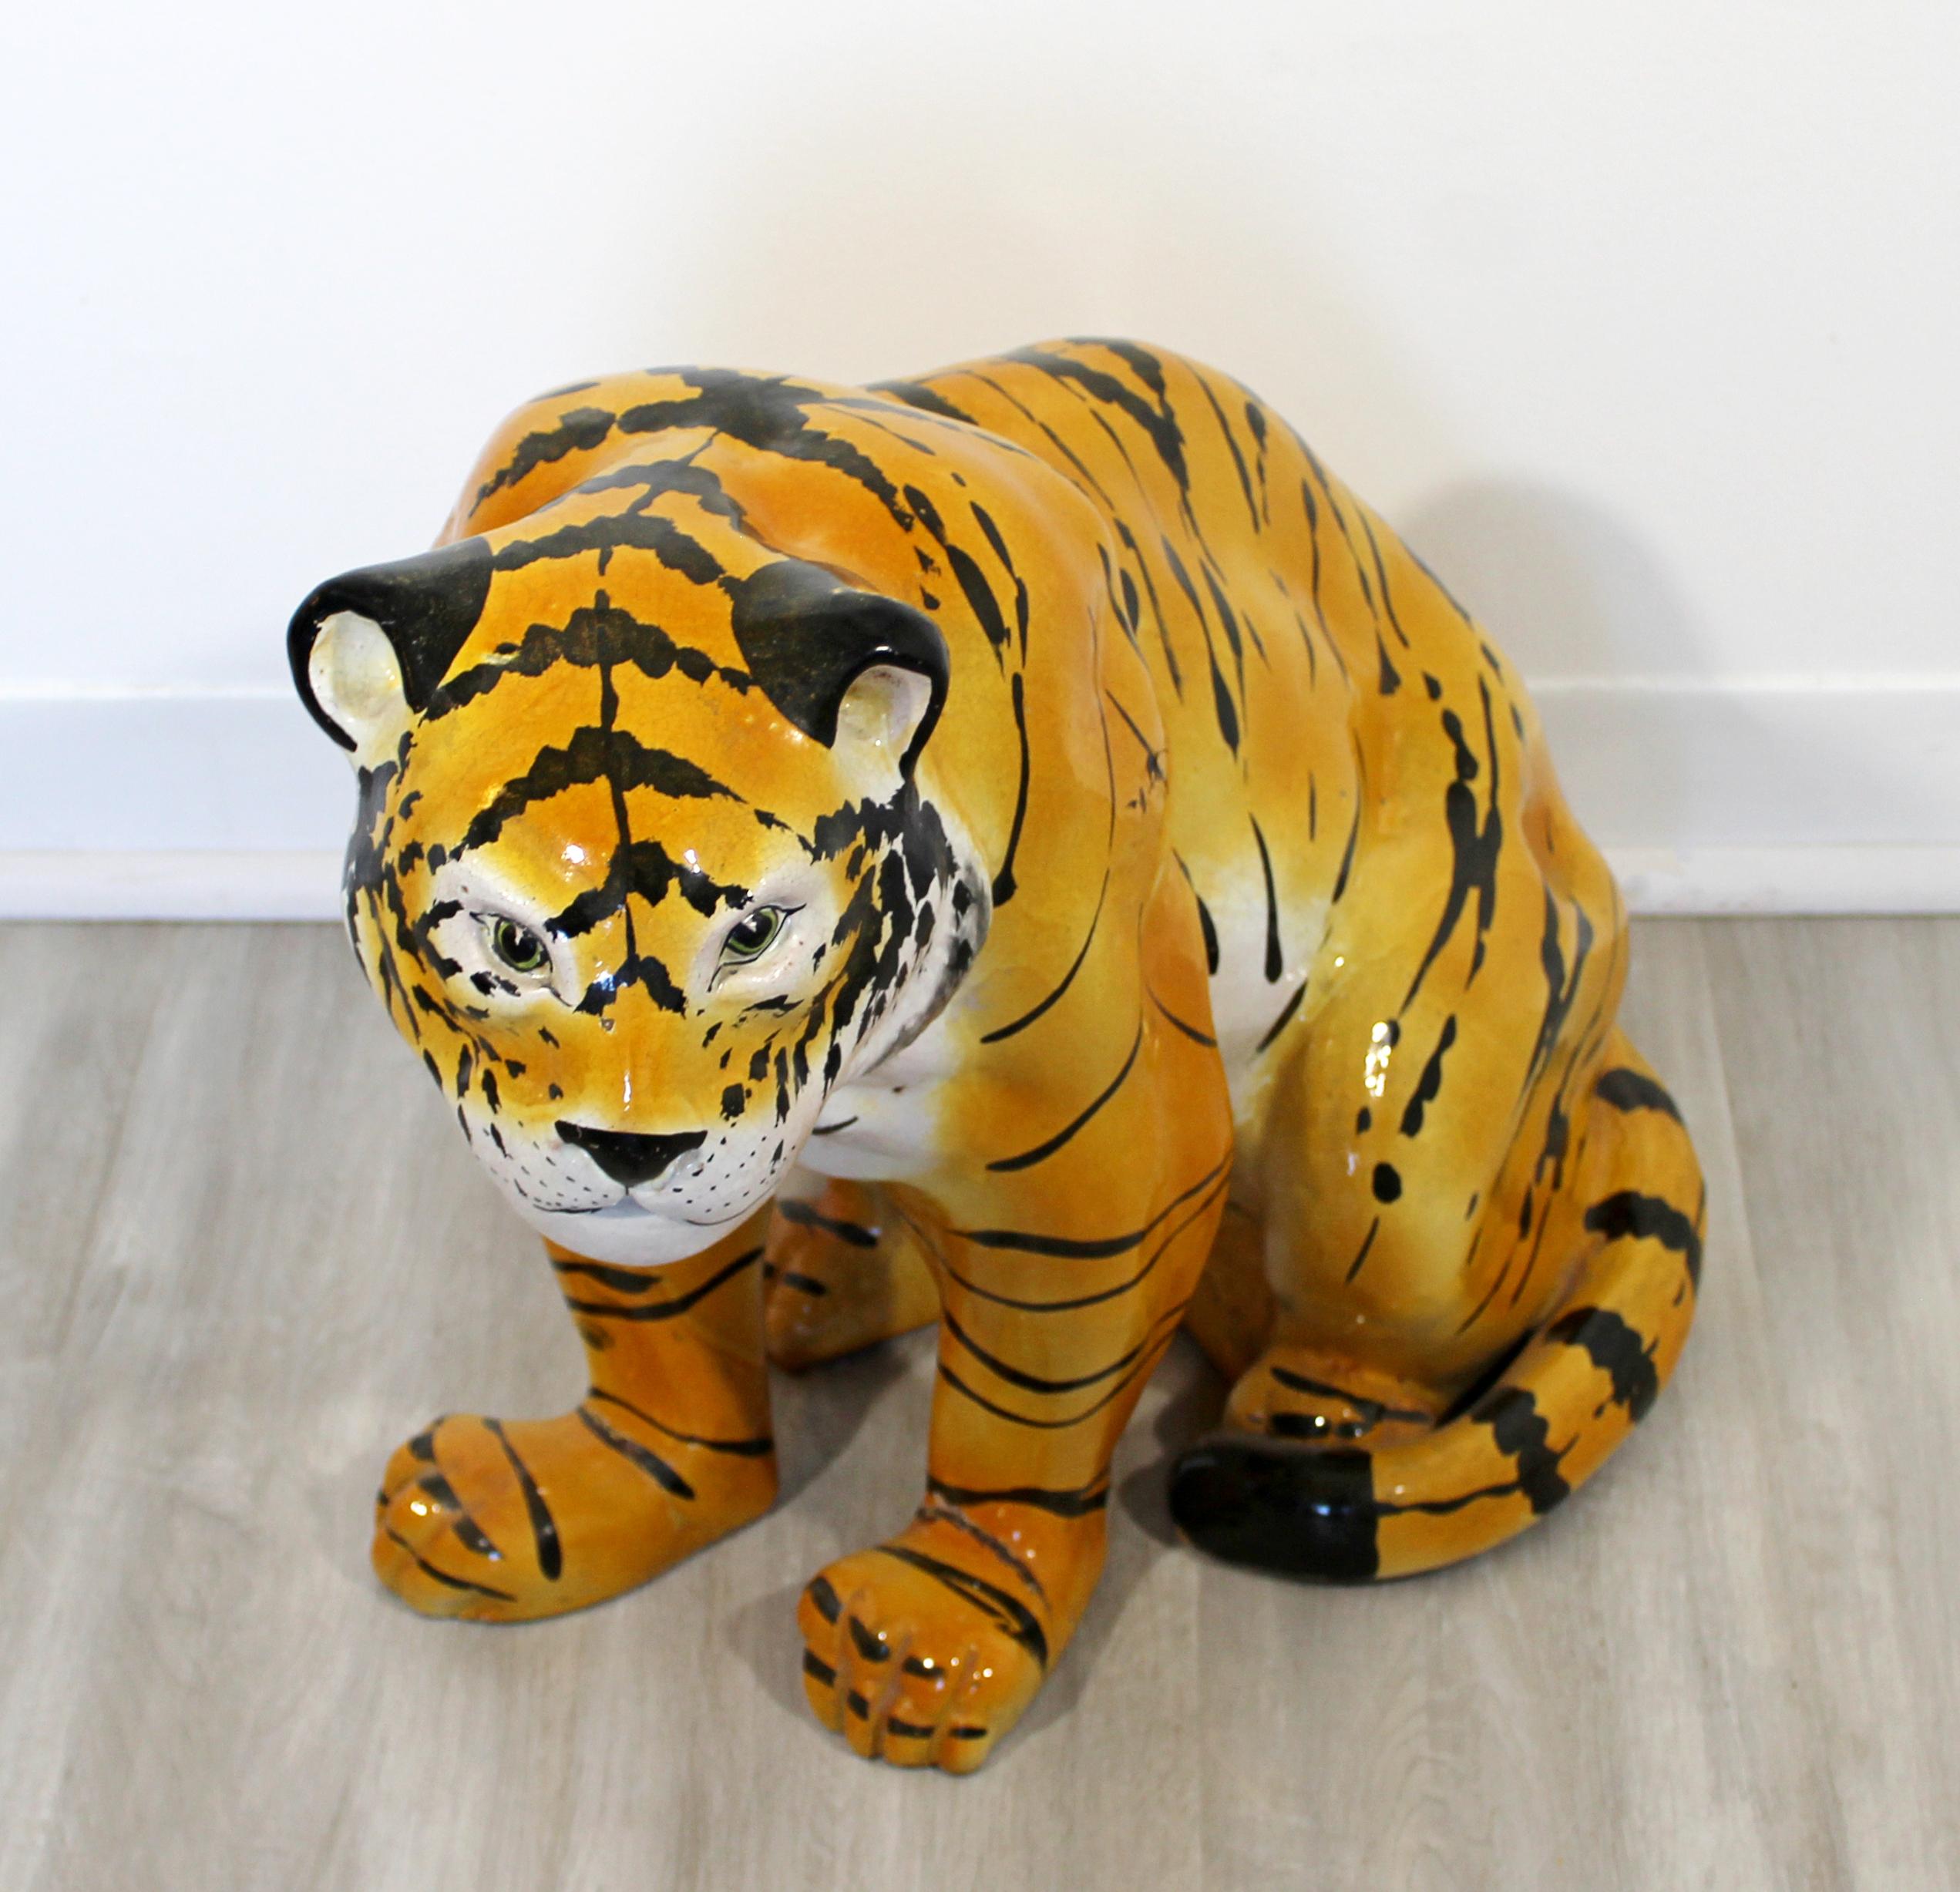 For your consideration is a gorgeous, painted porcelain floor sculpture of a cheetah, circa 1970s. In very good vintage condition. The dimensions are 22